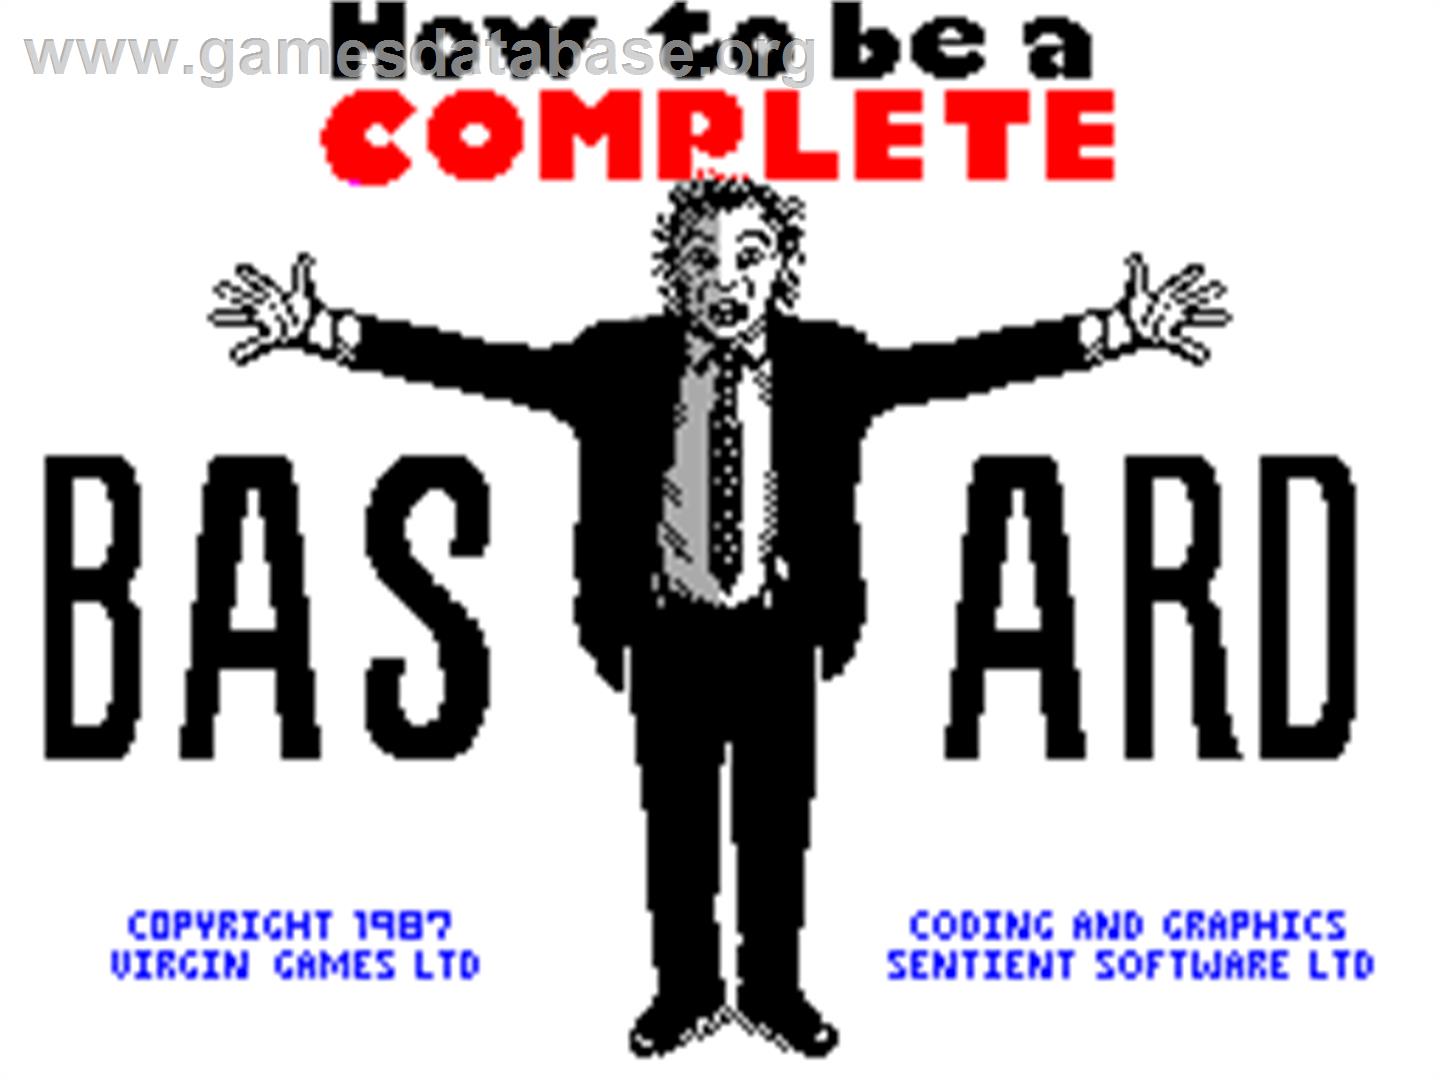 How to be a Complete Bastard - Sinclair ZX Spectrum - Artwork - Title Screen